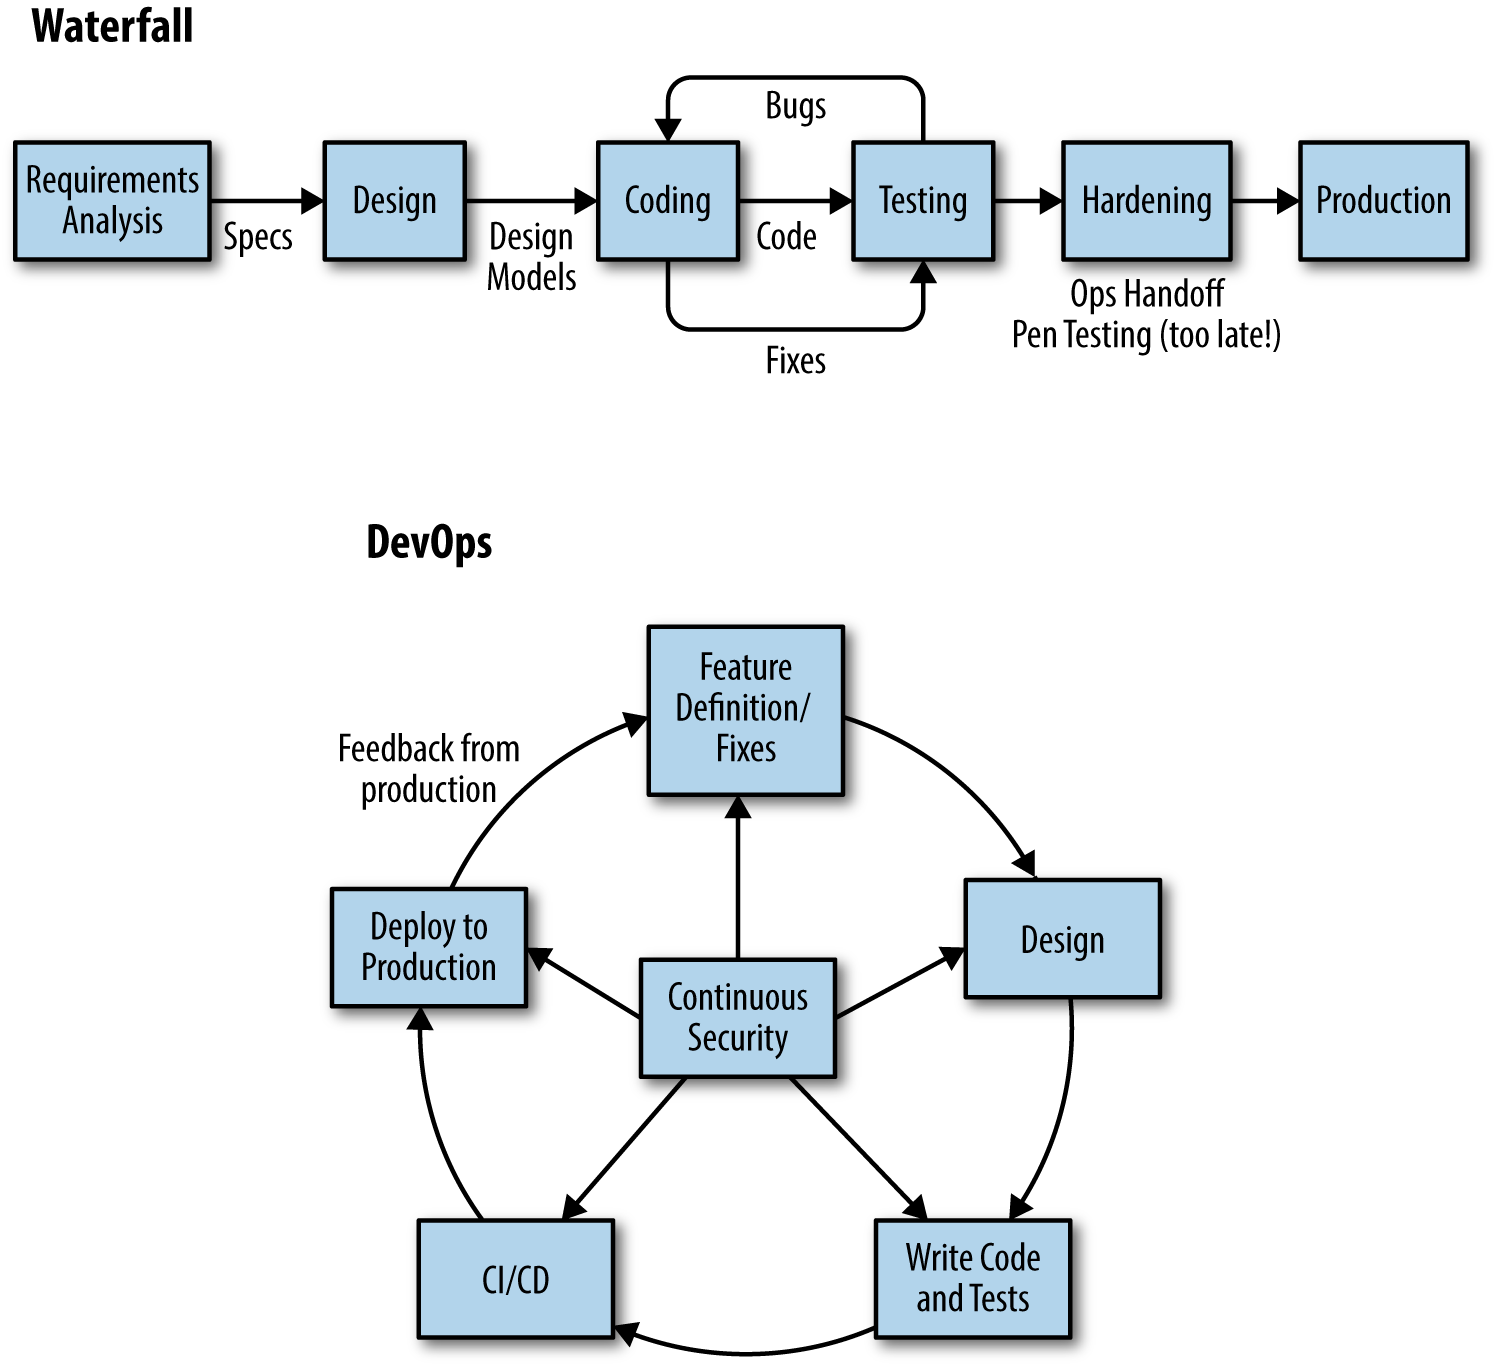 Waterfall and DevOps cycle